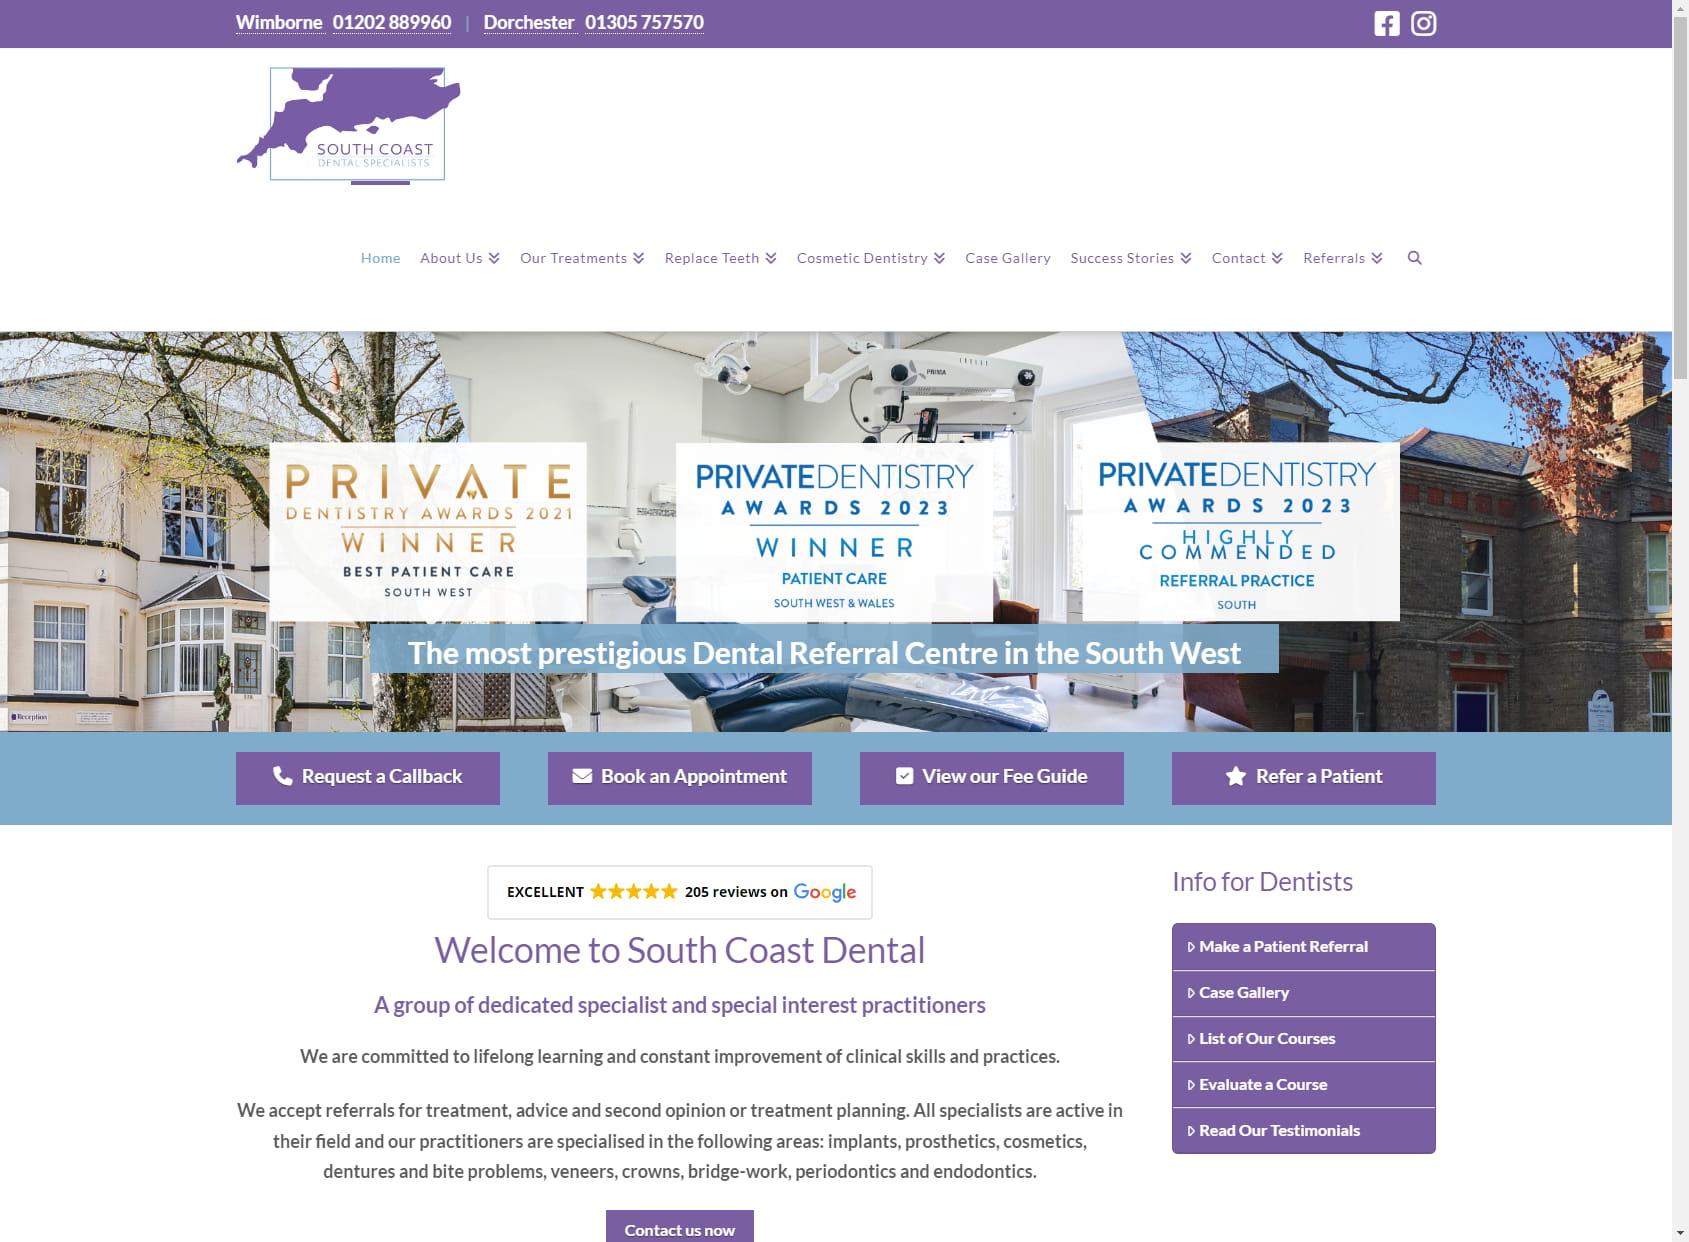 South Coast Implant & Cosmetic Dentist